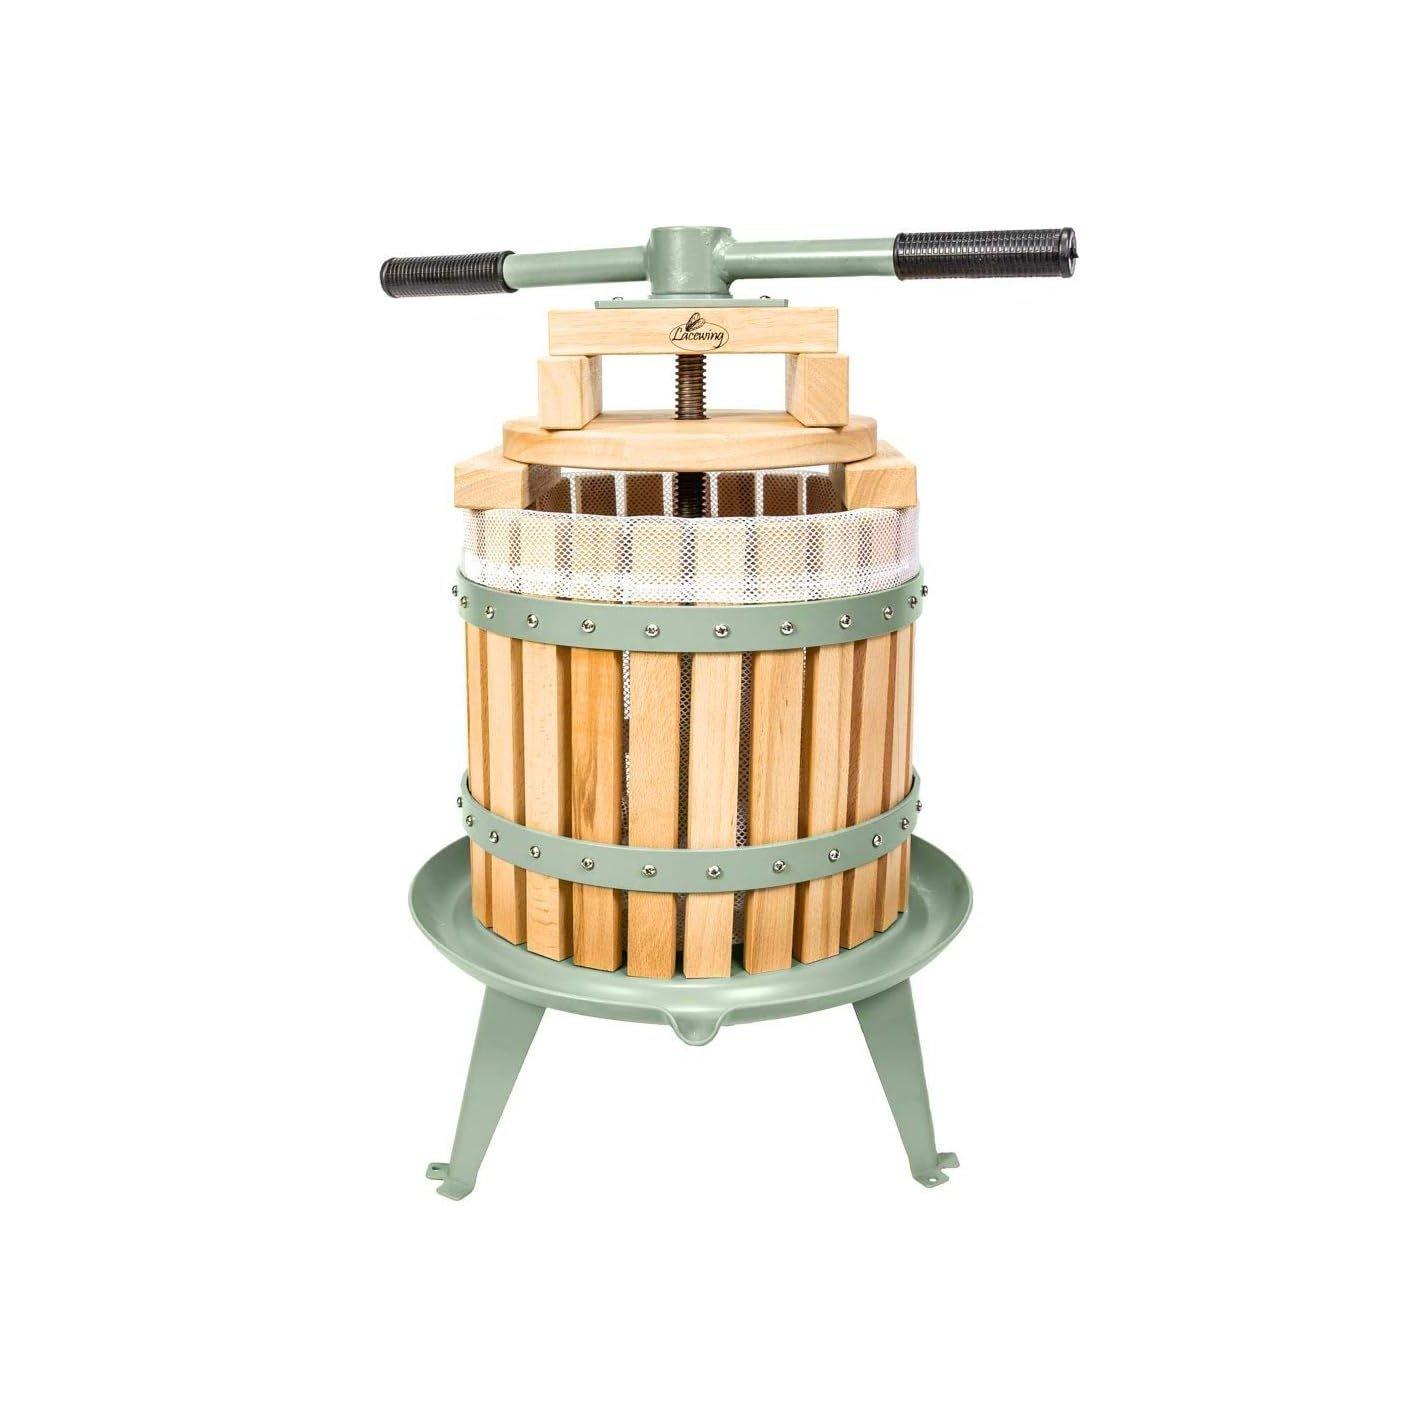 6L Easy Press Double Handled Apple Fruit Pear Cider Press with 3 x Free Press Bags, 4 x Press Blocks